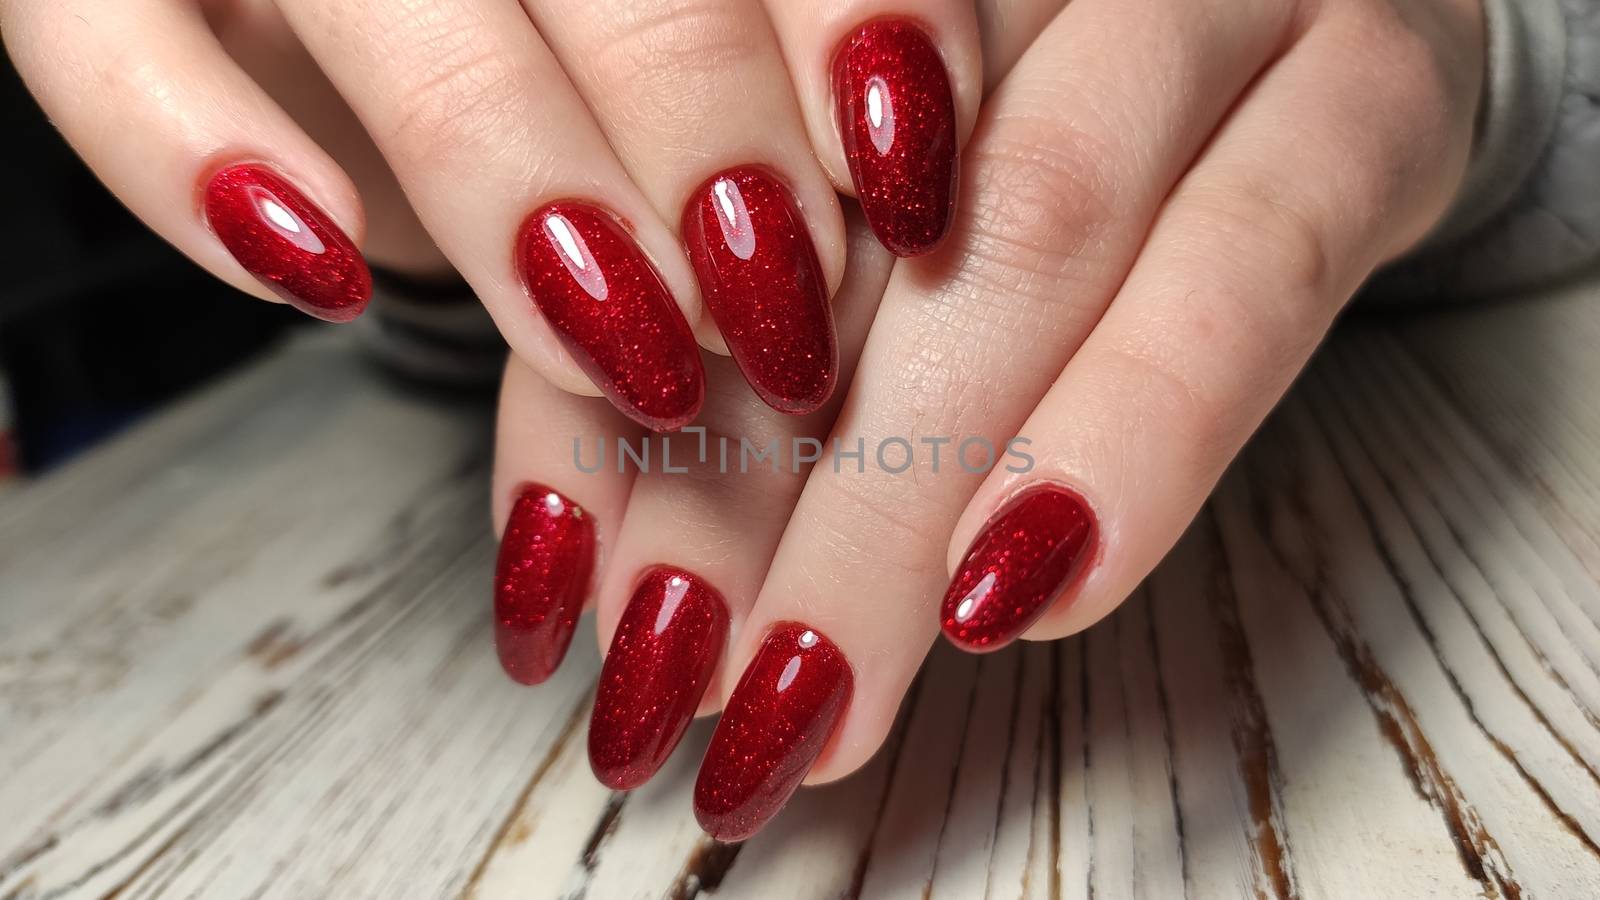 Manicured nails colored with red nail polish by SmirMaxStock